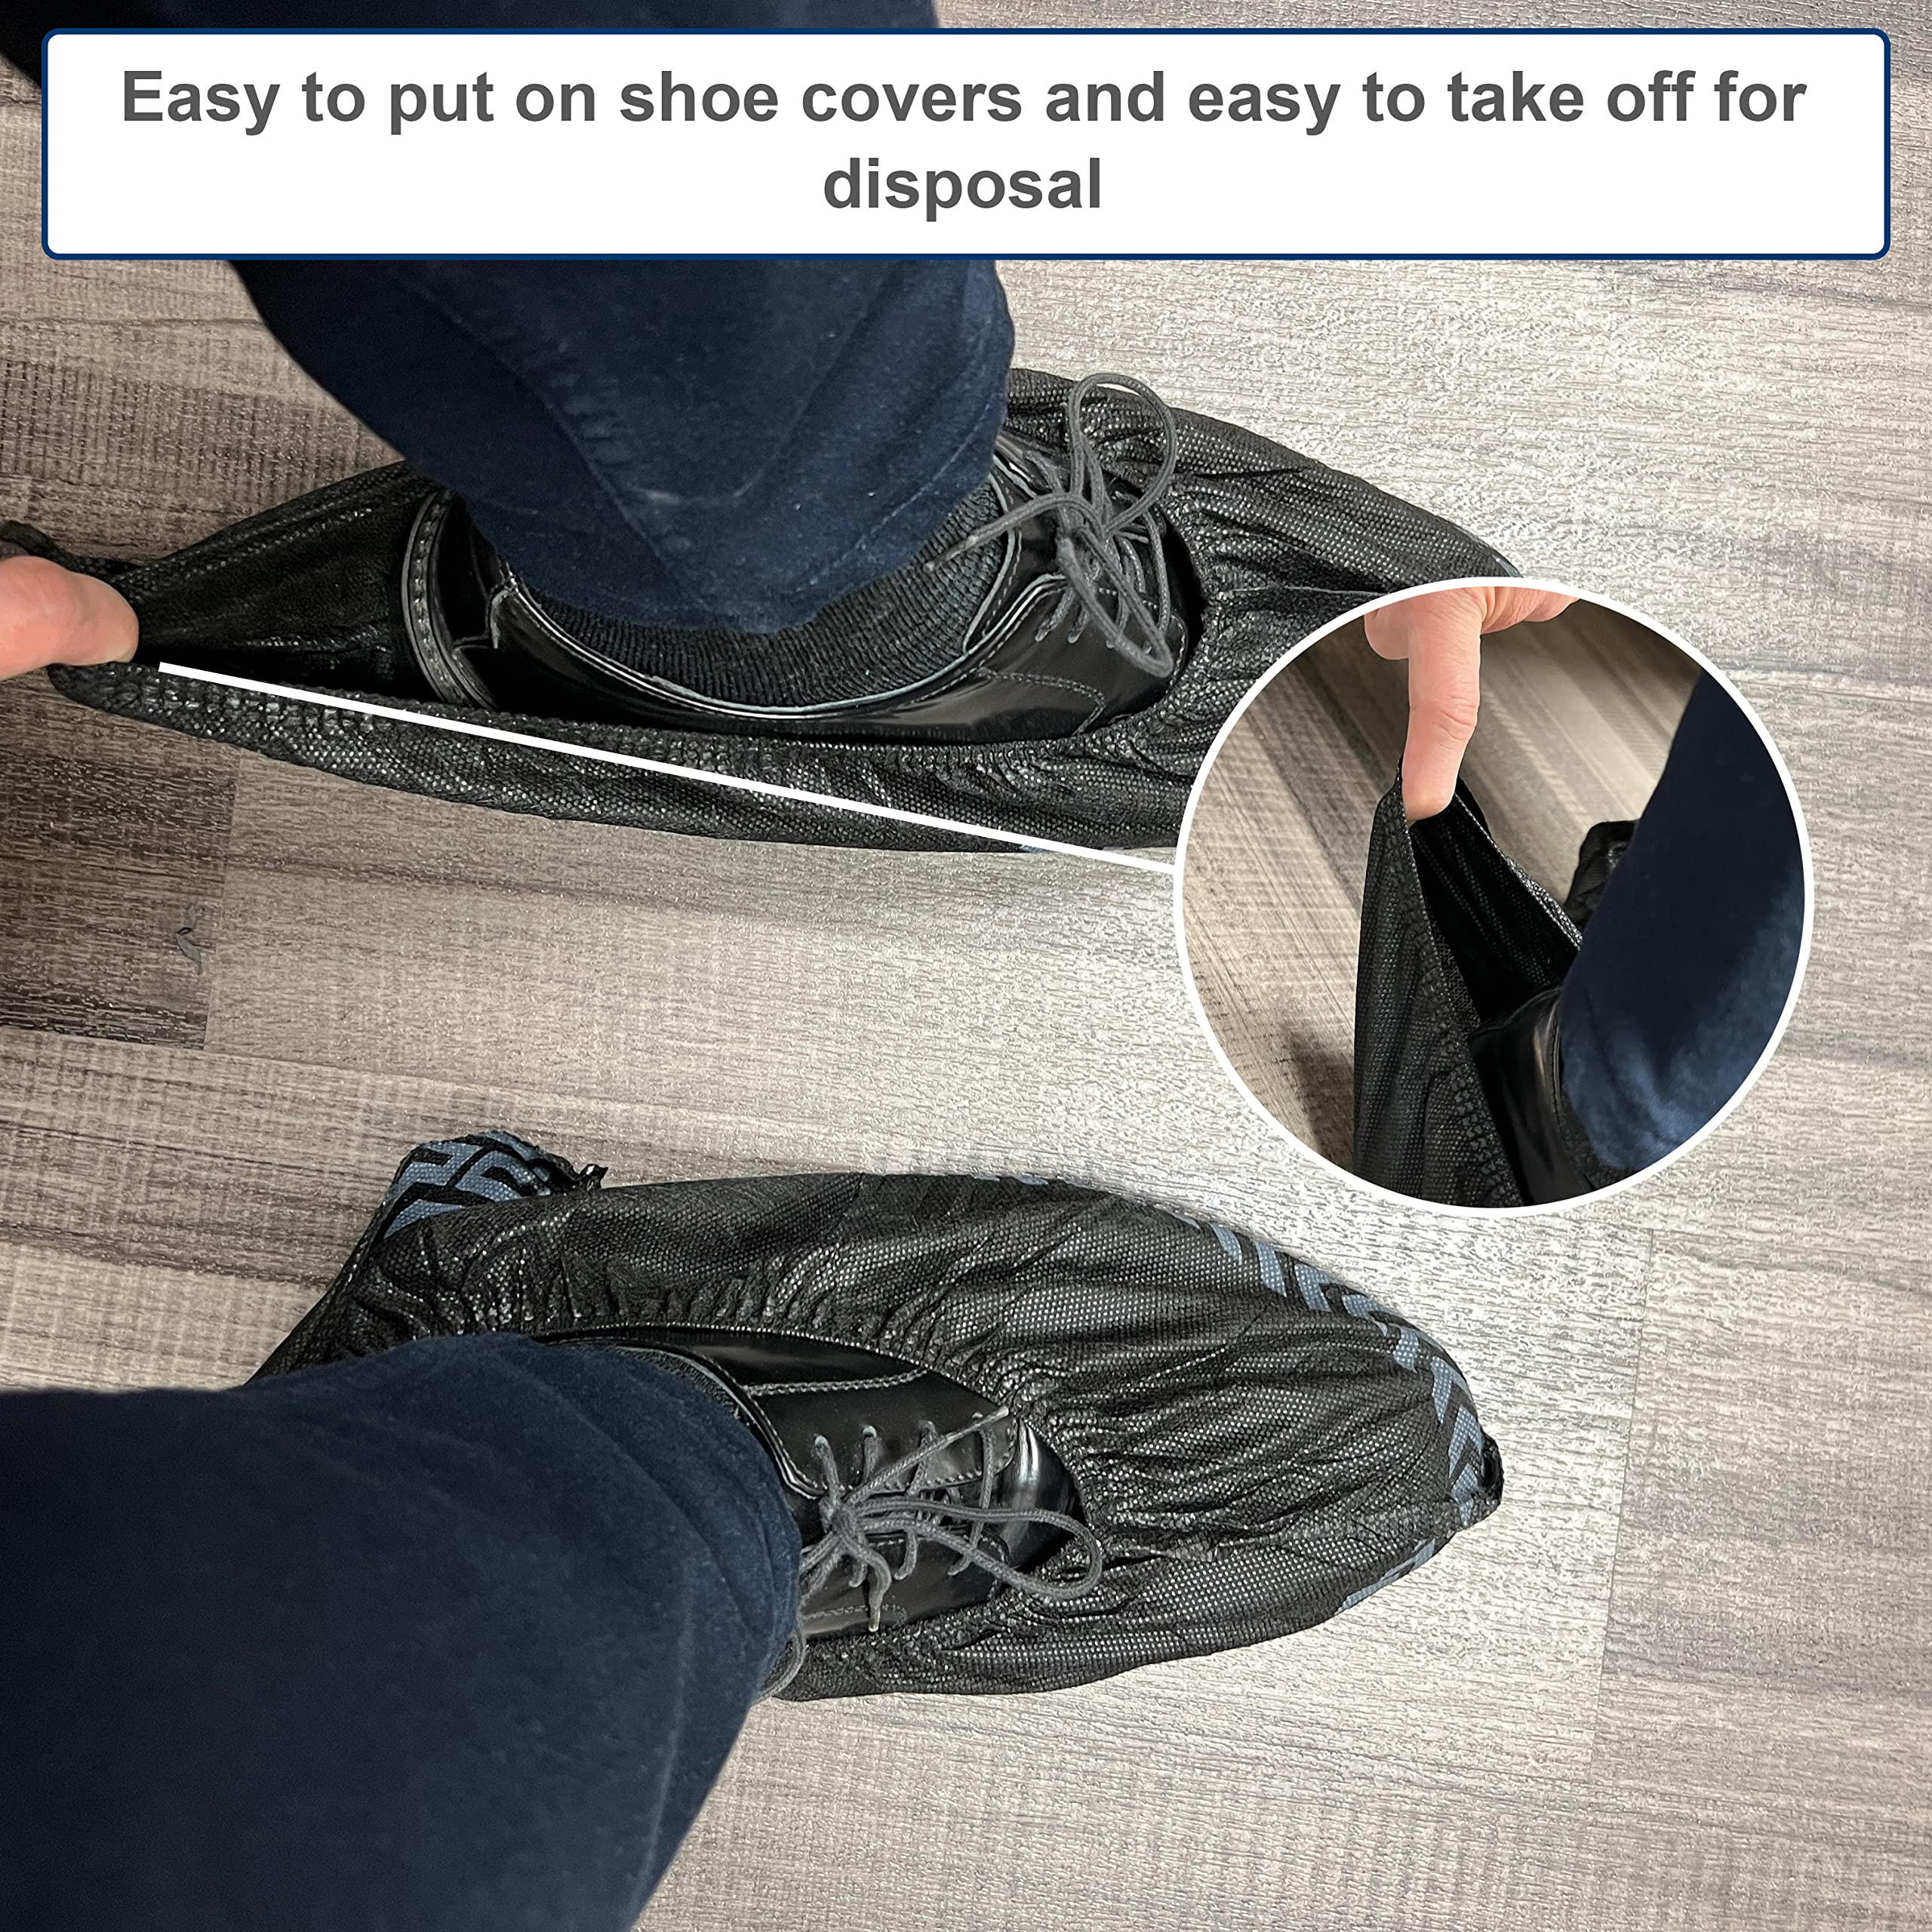 Buena Goods 100 Pack Extra Large Disposable Black Boot & Shoe Covers. Reusable Premium Water Resistant Durable Booties with Non Slip Treads for Indoor Use. Fits US Men's Size 14 & Women's 16 Shoe Size